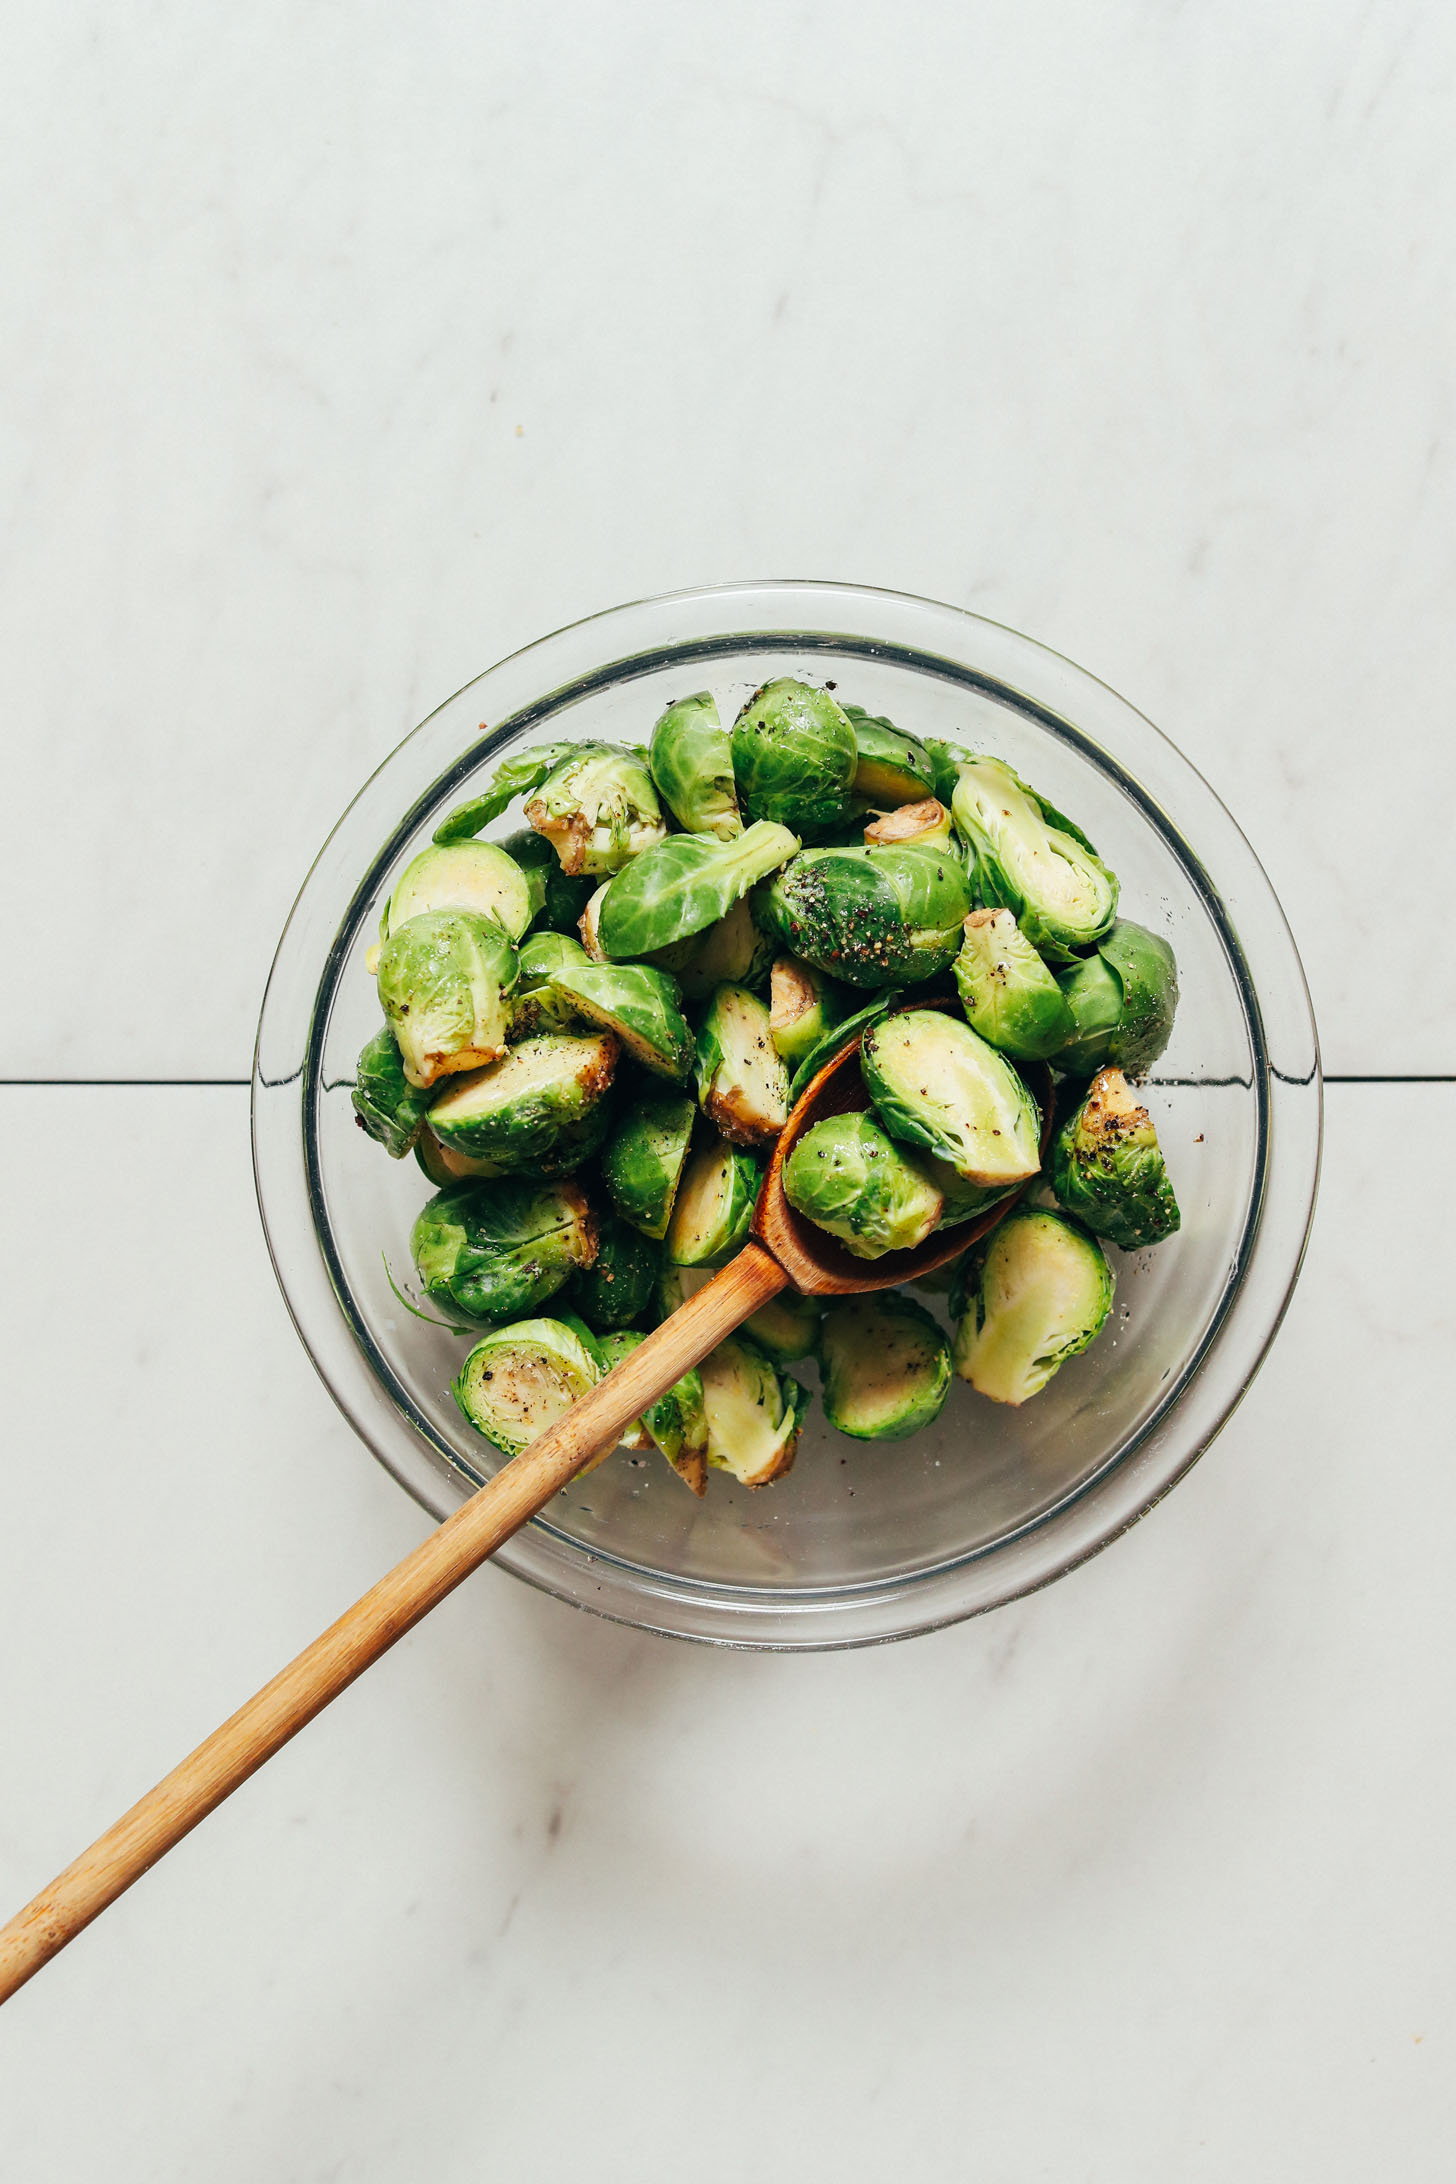 Bowl of halved Brussels sprouts